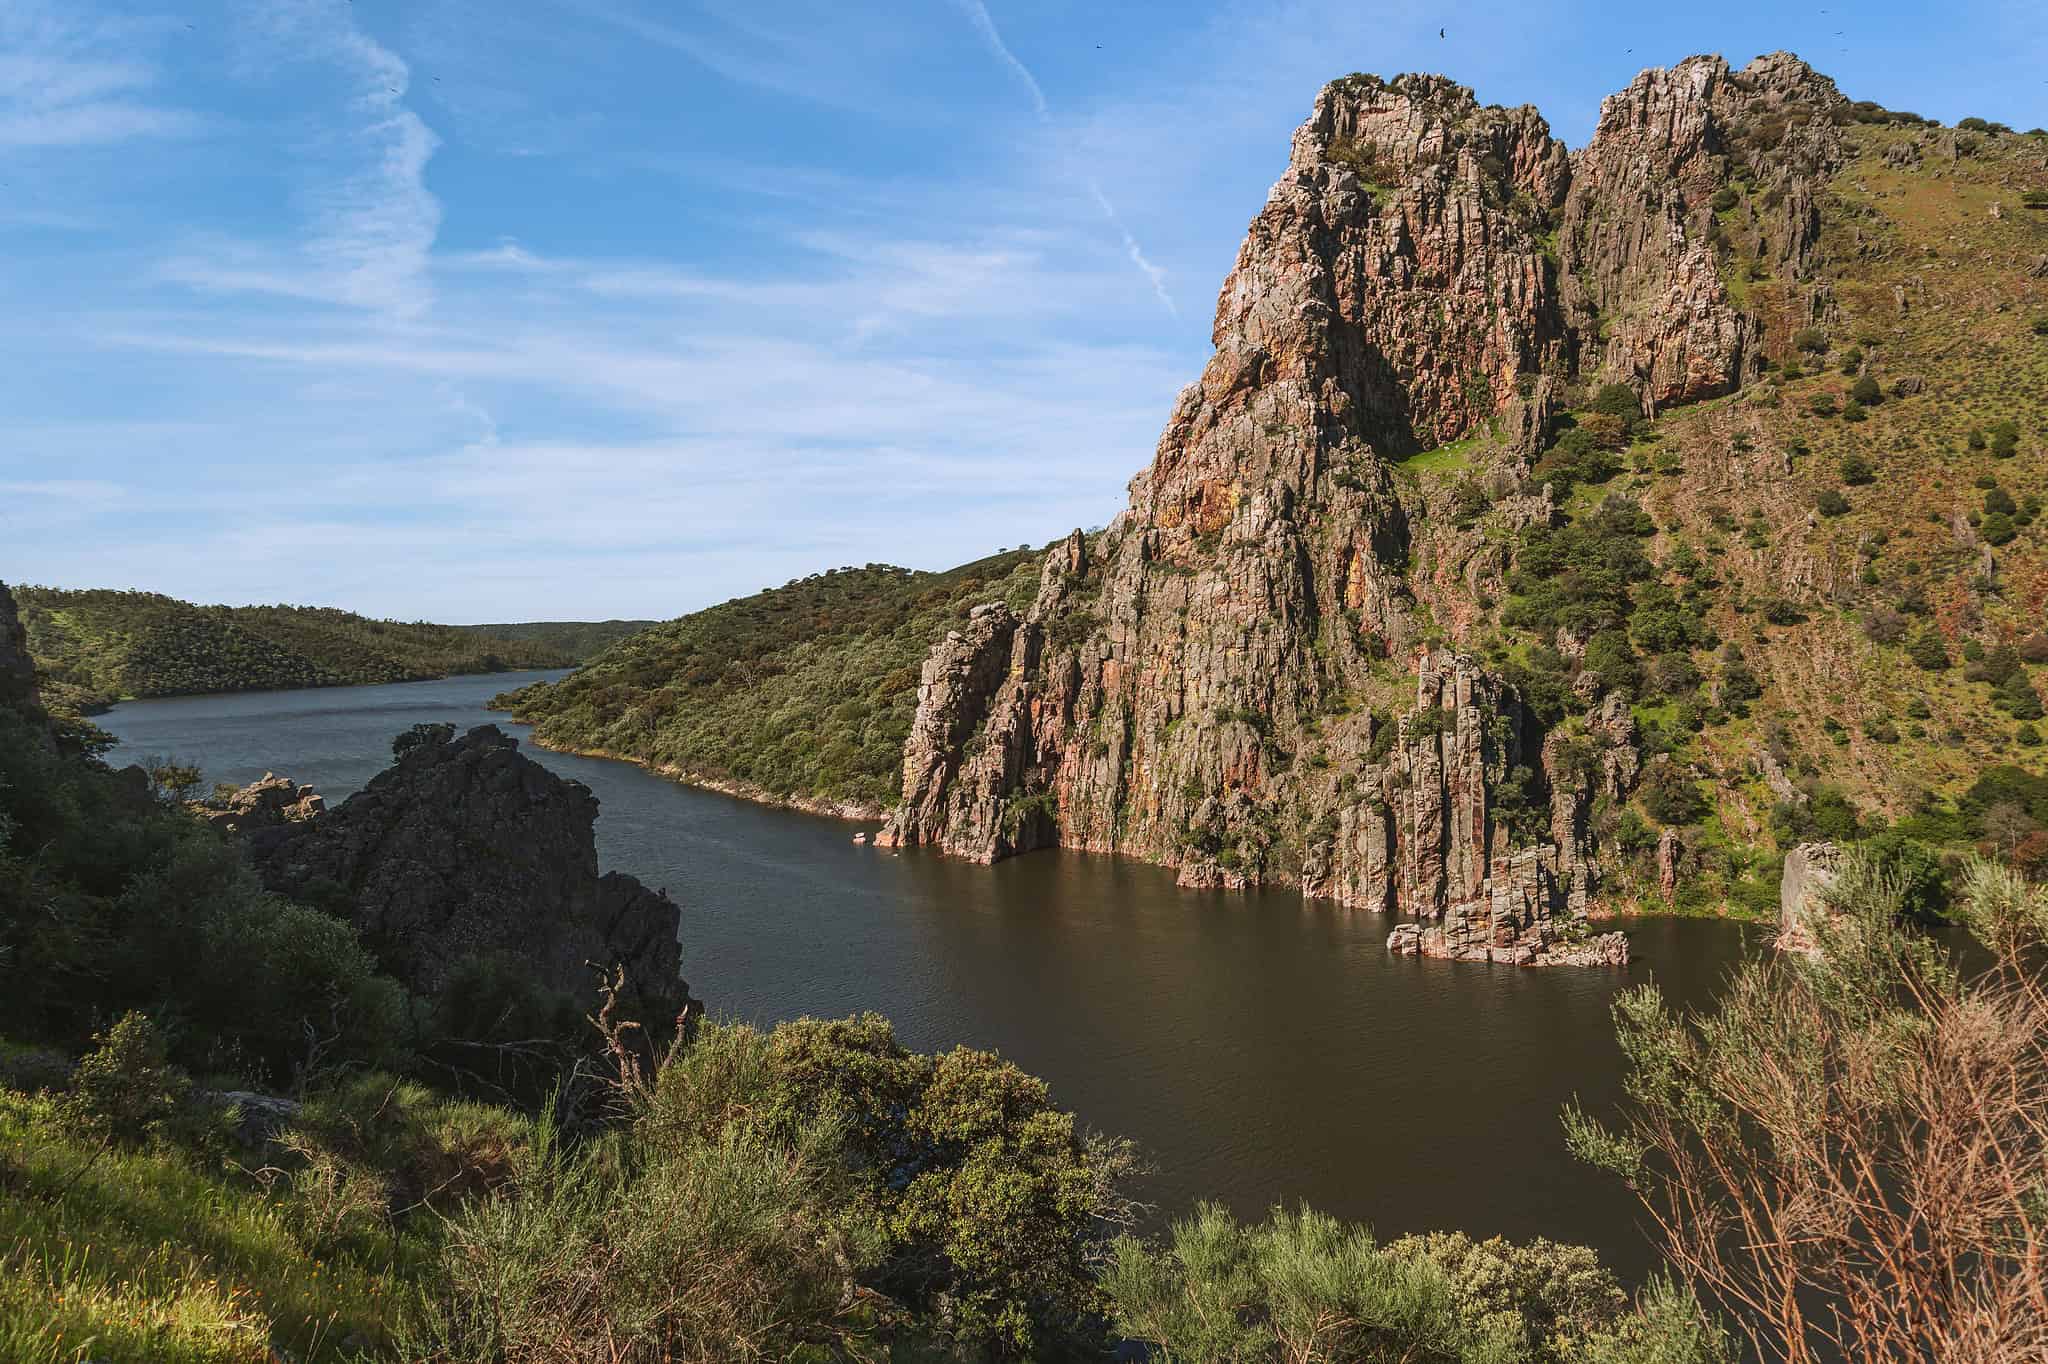 View of Peña Falcón rock formation from Salto del Gitano viewpoint in Monfragüe National Park on a sunny day, with the river visible in the background.